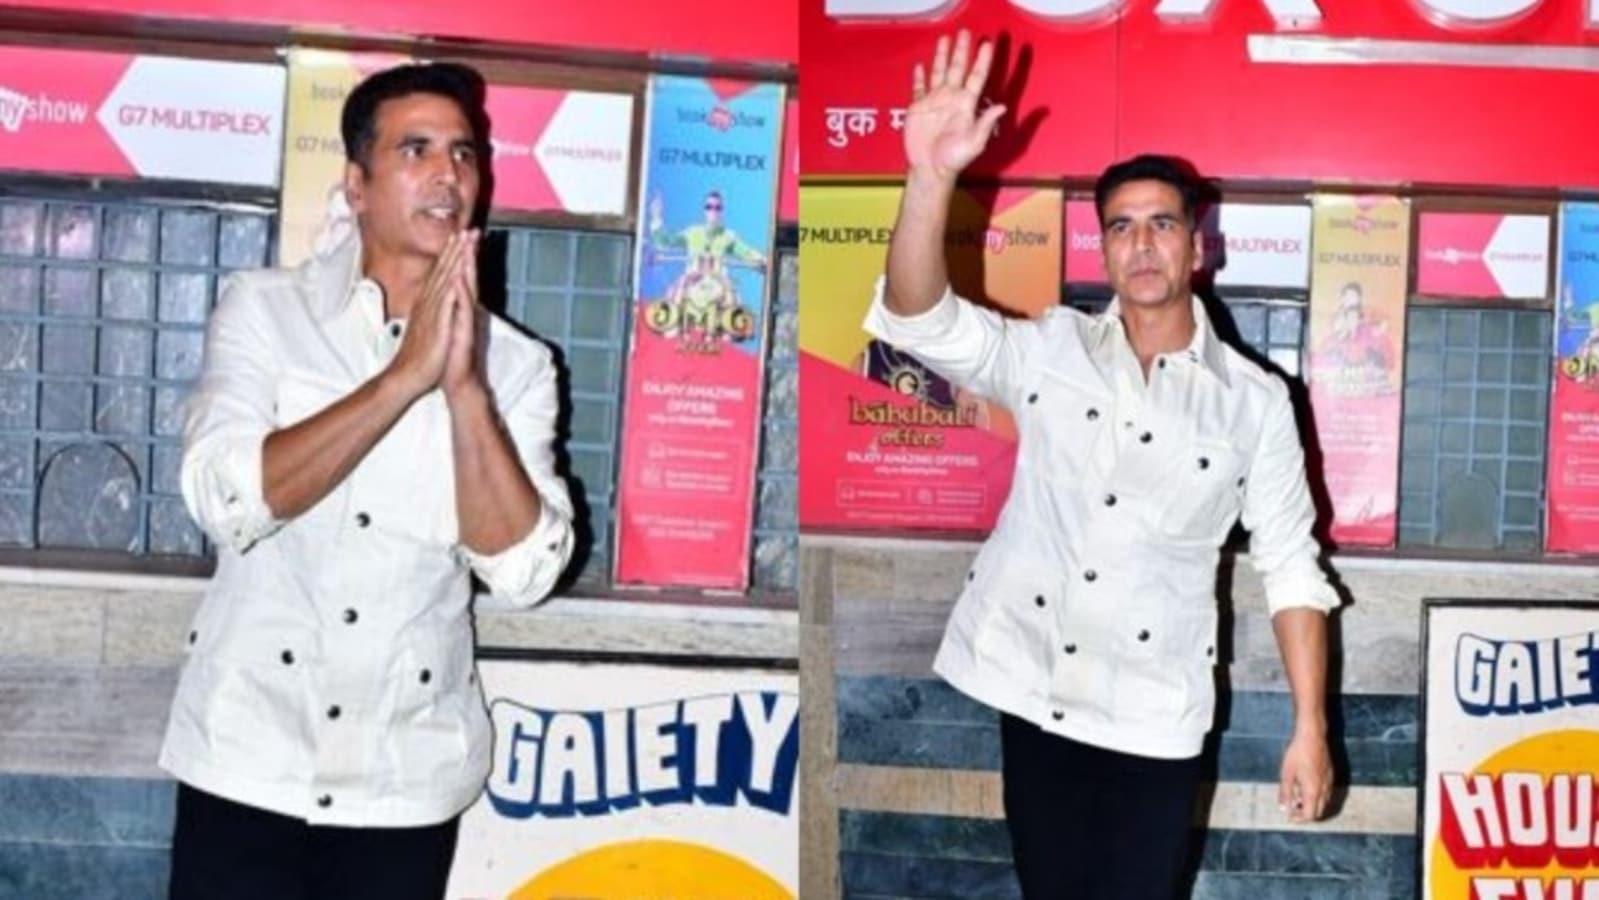 Akshay Kumar shakes hands with fans and greets with folded hands at Mumbai theatre, gestures them not to push. Watch